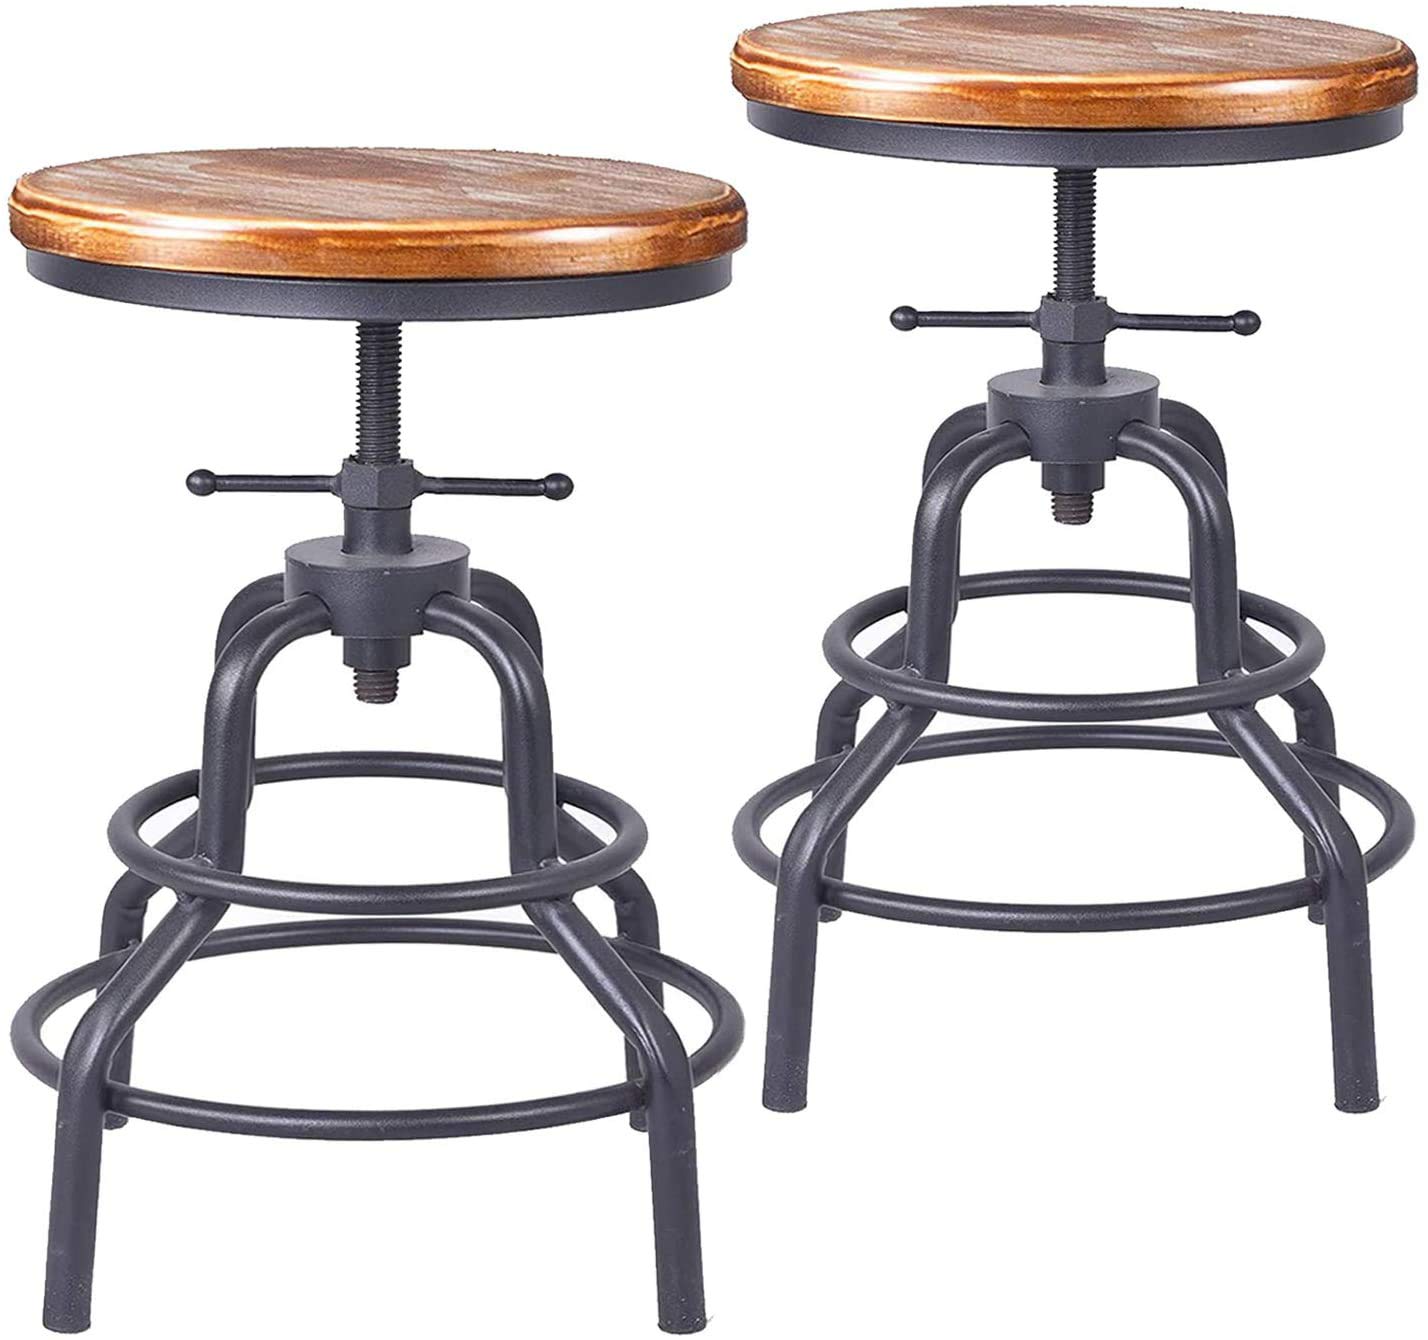 Diwhy Industrial Vintage Bar Stool,Kitchen Counter Height Adjustable Screw Stool,Swivel Bar Stool,Metal Wood Stool,27 Inch,Fully Welded Set of 2 (W...